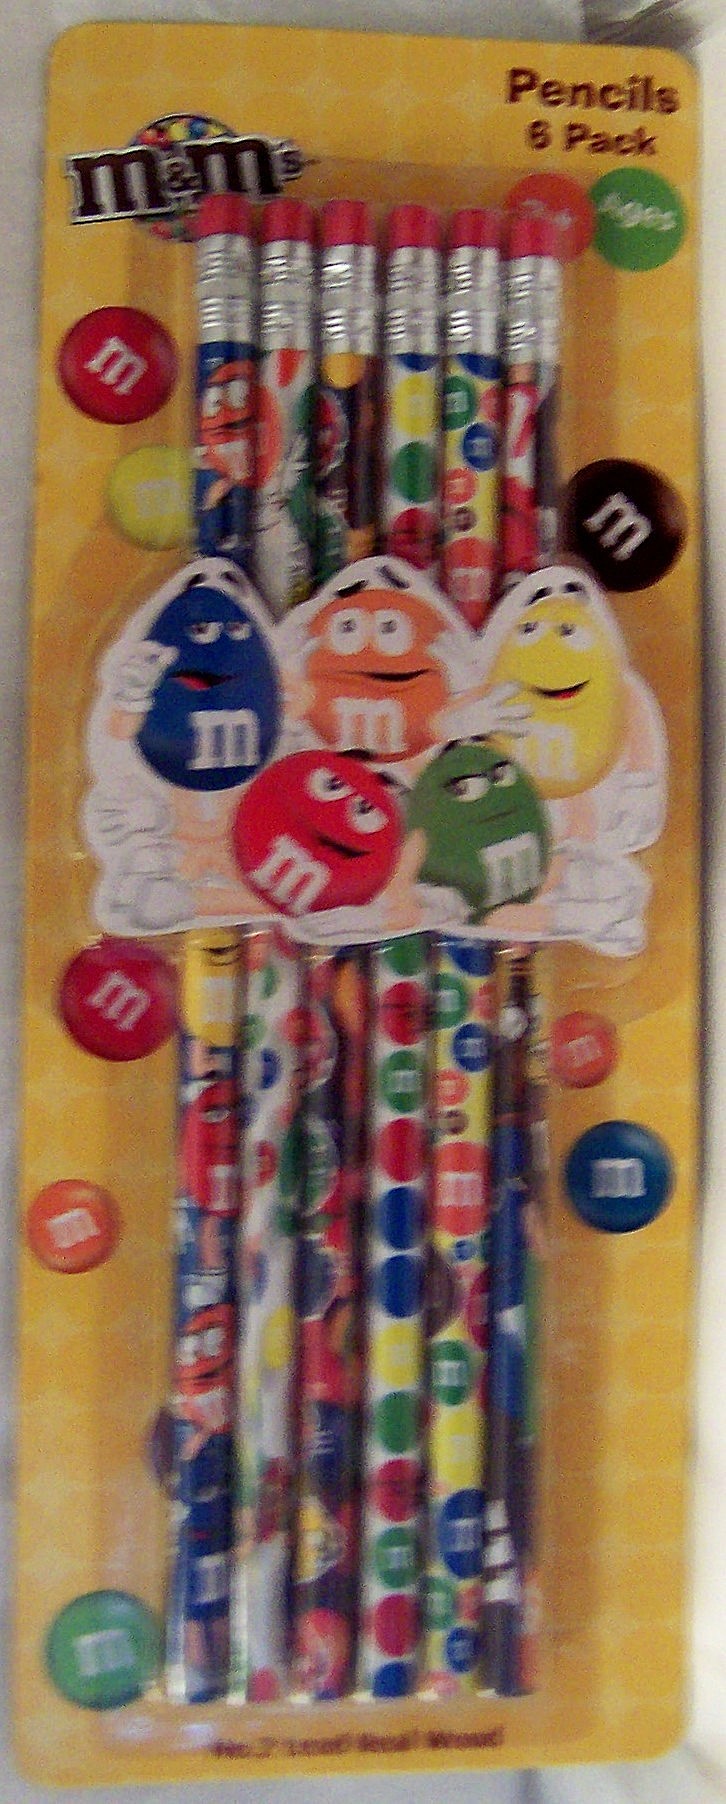 M&M'S Collectible Pencils 6 Pack New Front